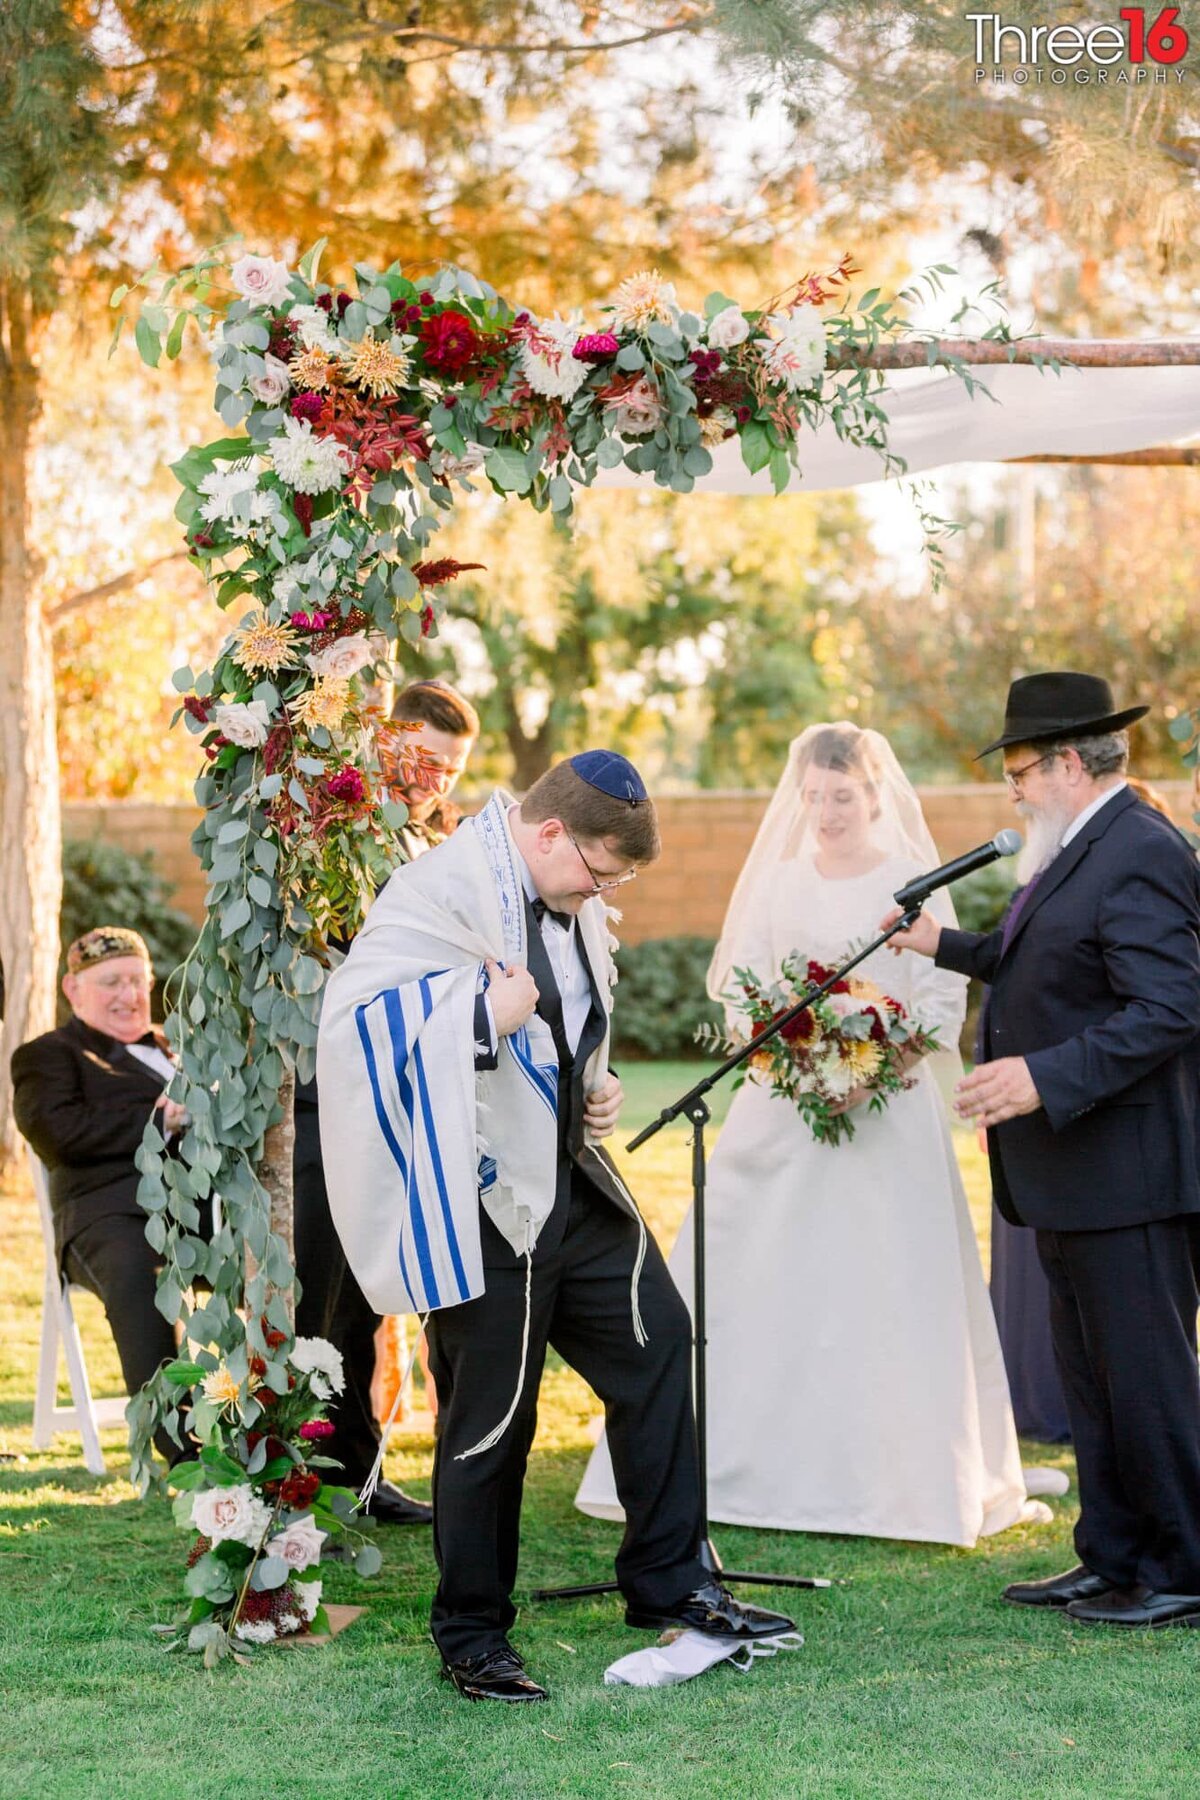 Groom stomps on the glass rolled in a napkin as per Jewish custom for good luck